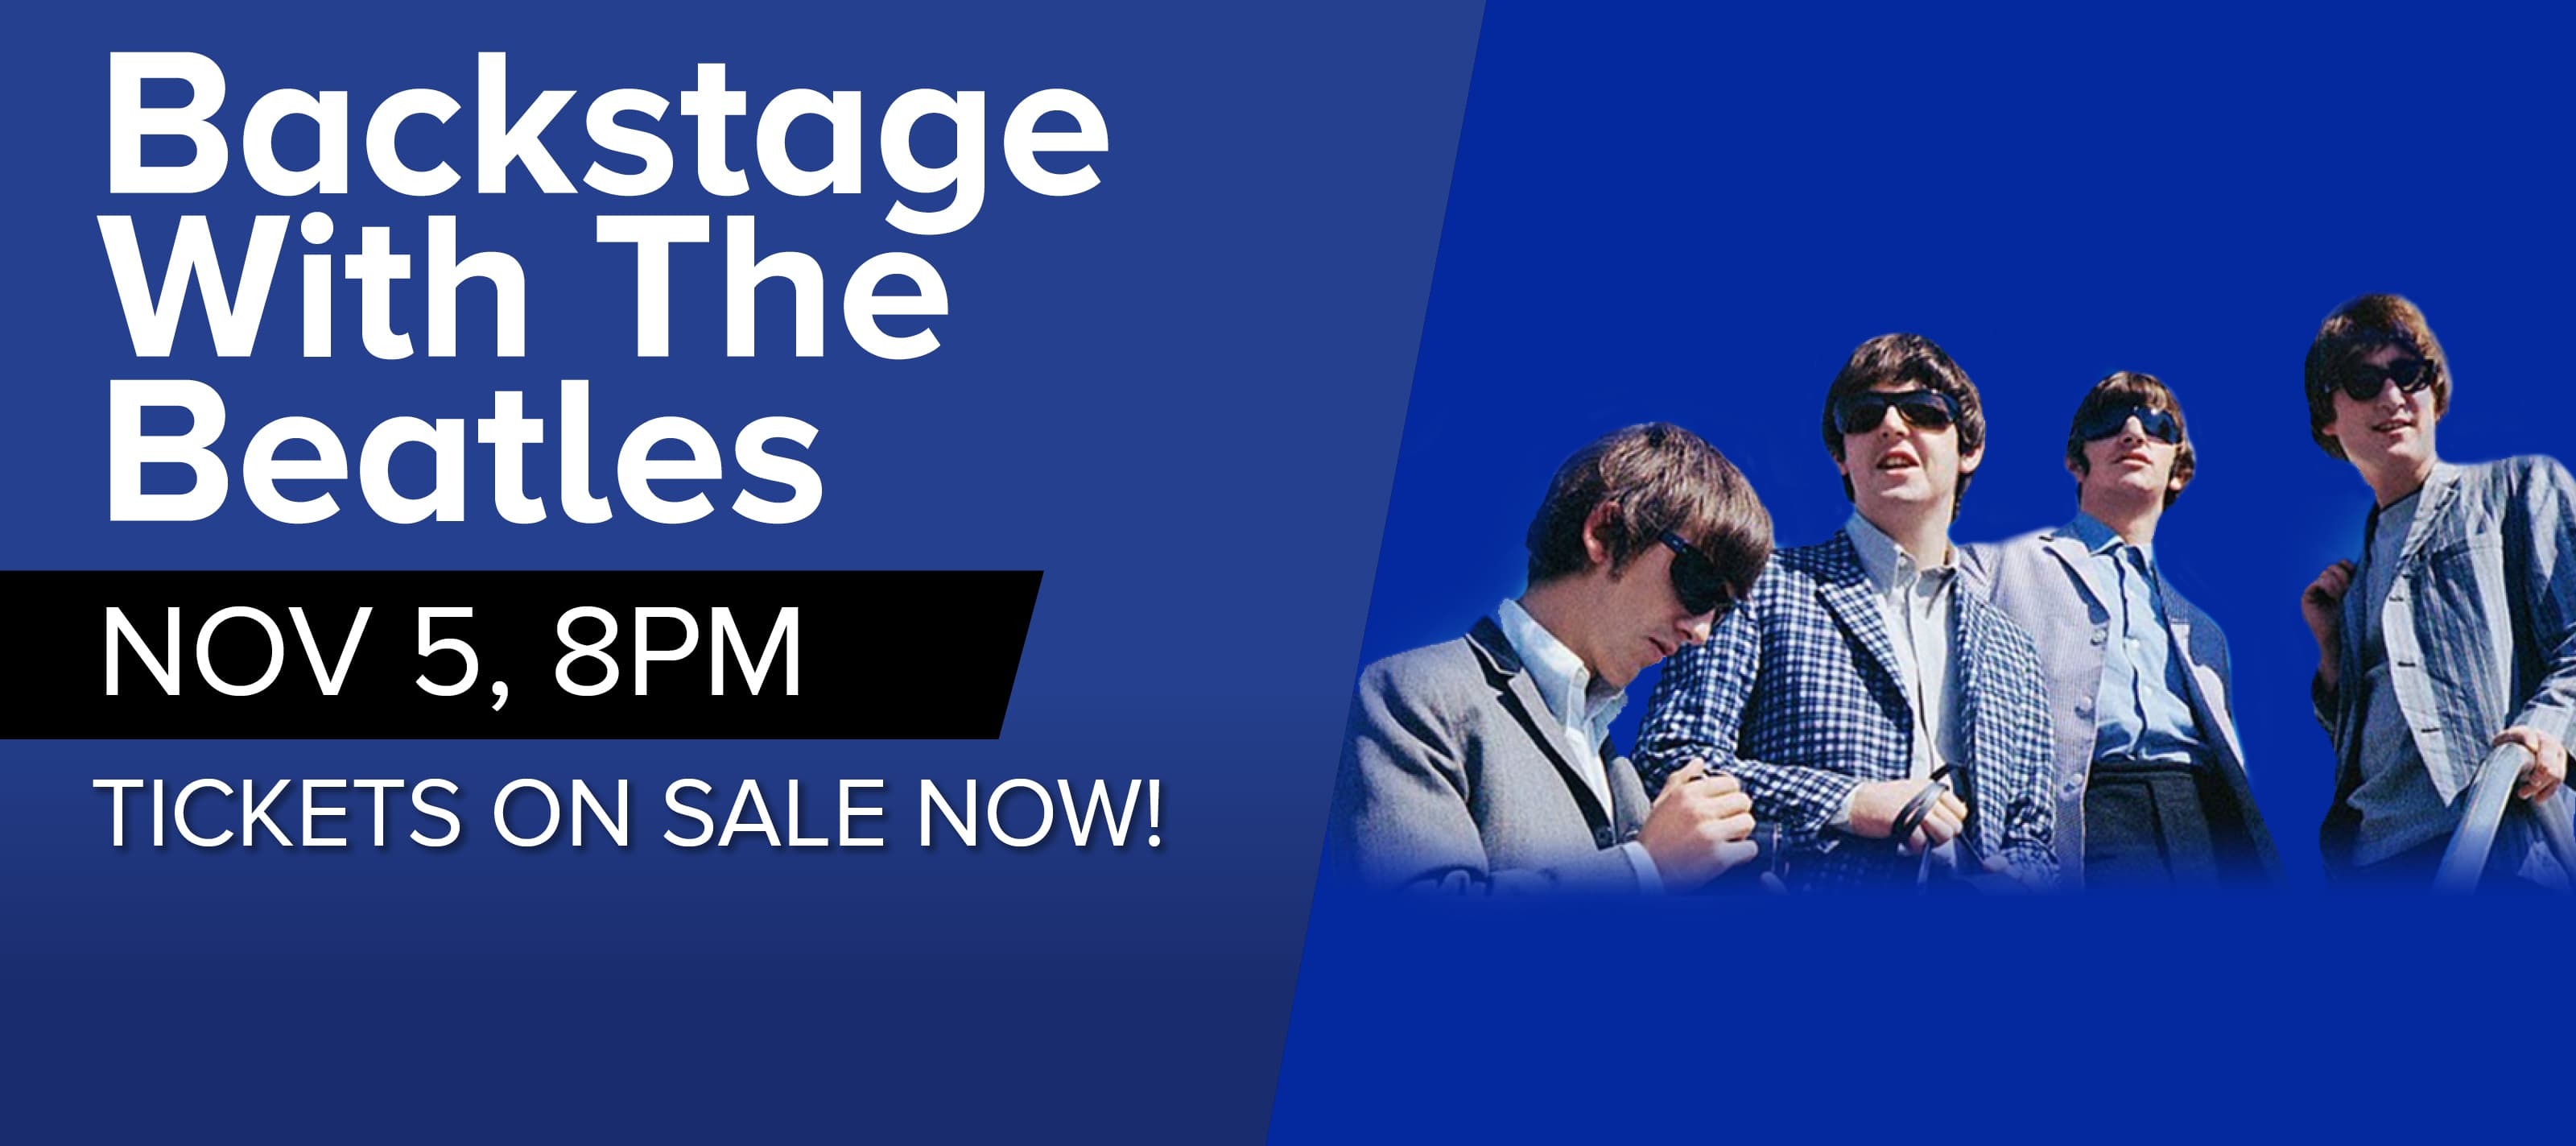 backstage with the beatles nov 5 8pm tickets on sale now